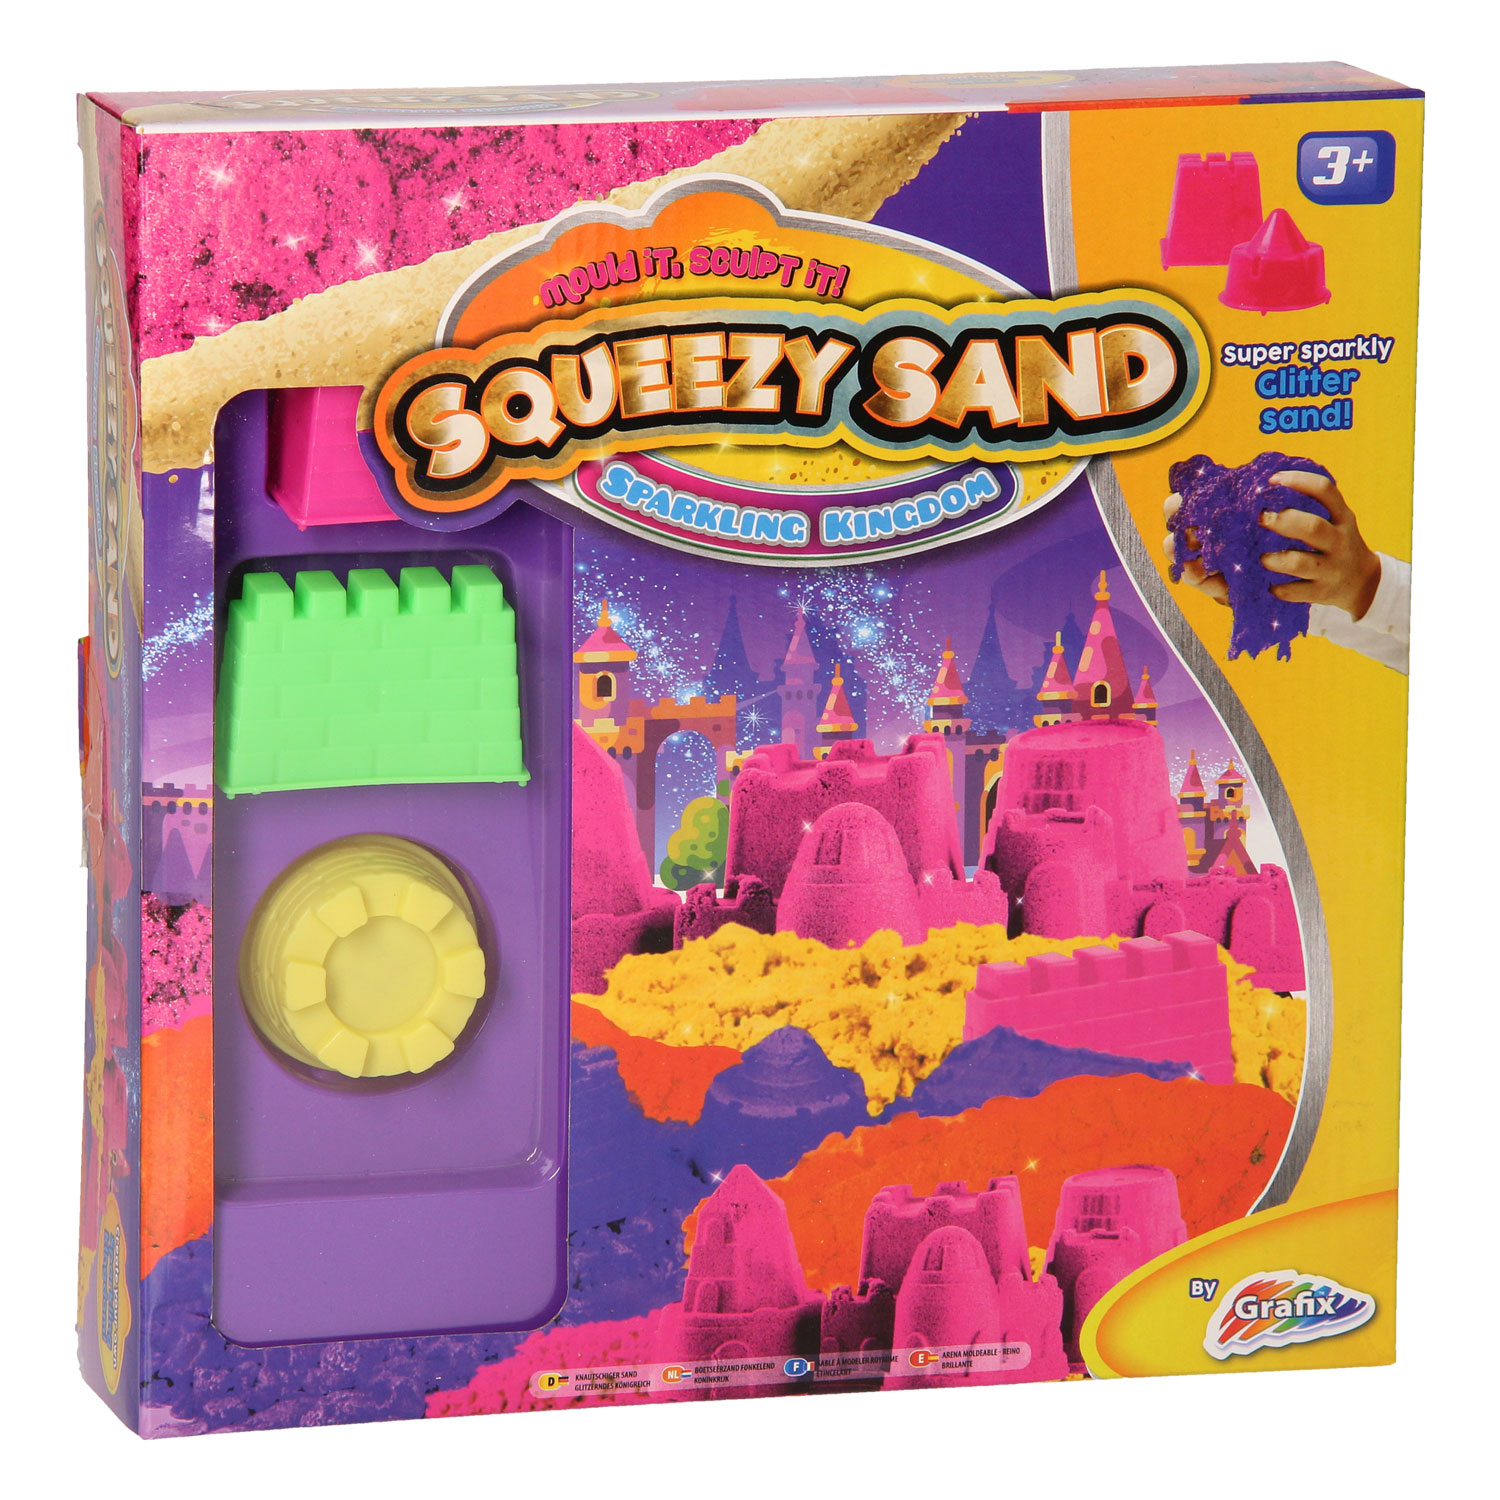 Squeezy Spielsand